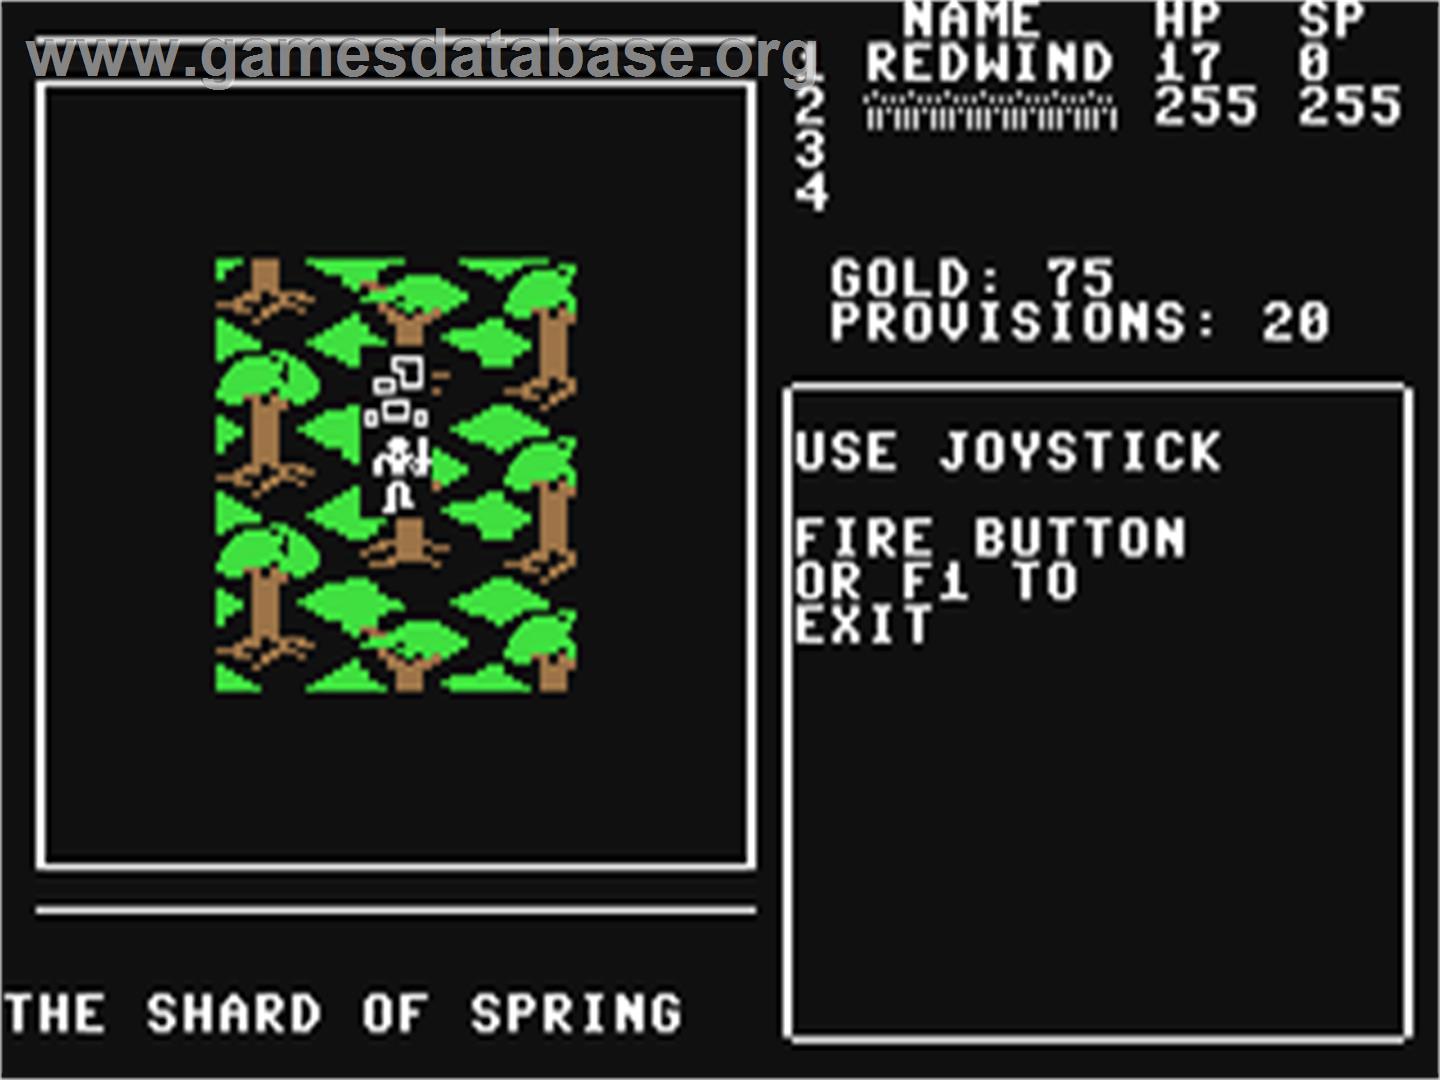 Shard of Spring - Commodore 64 - Artwork - In Game